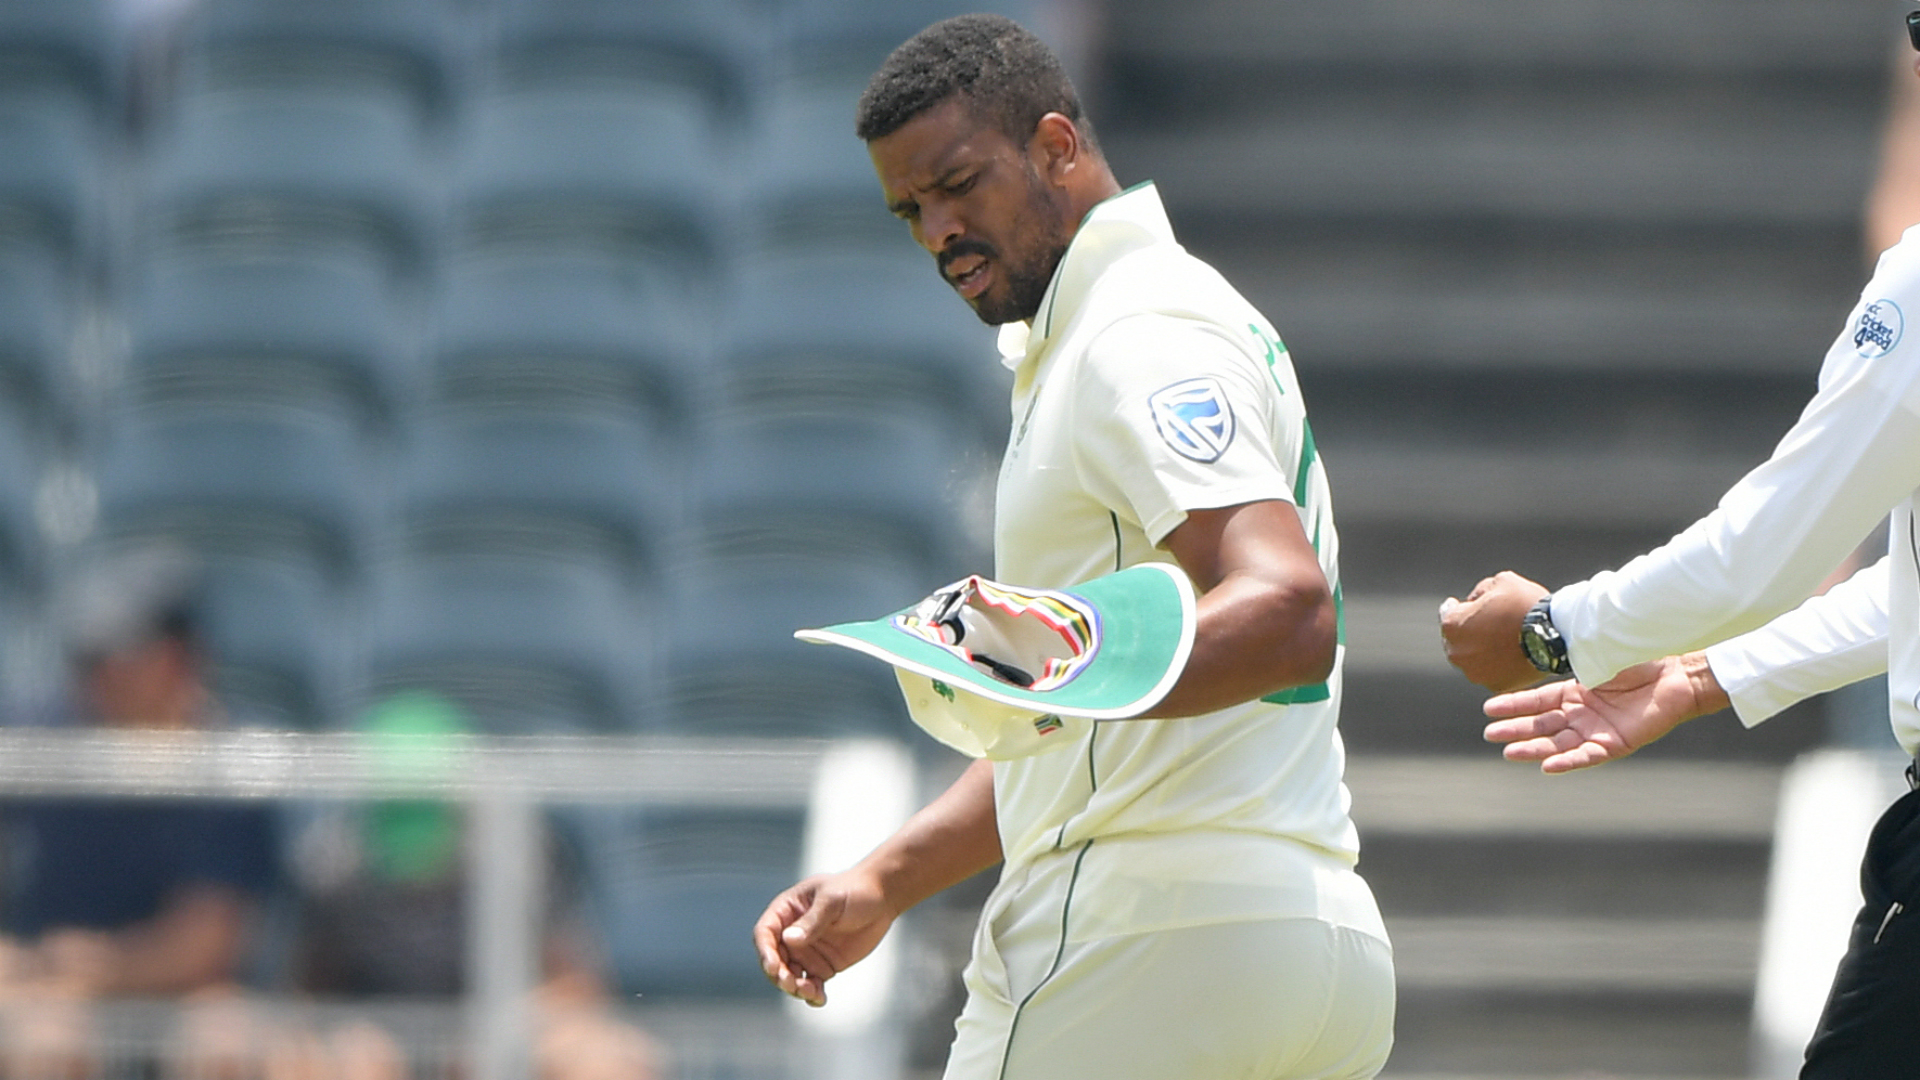 Vernon Philander's international career ended in disappointment against England, which was a source of frustration for Faf du Plessis.